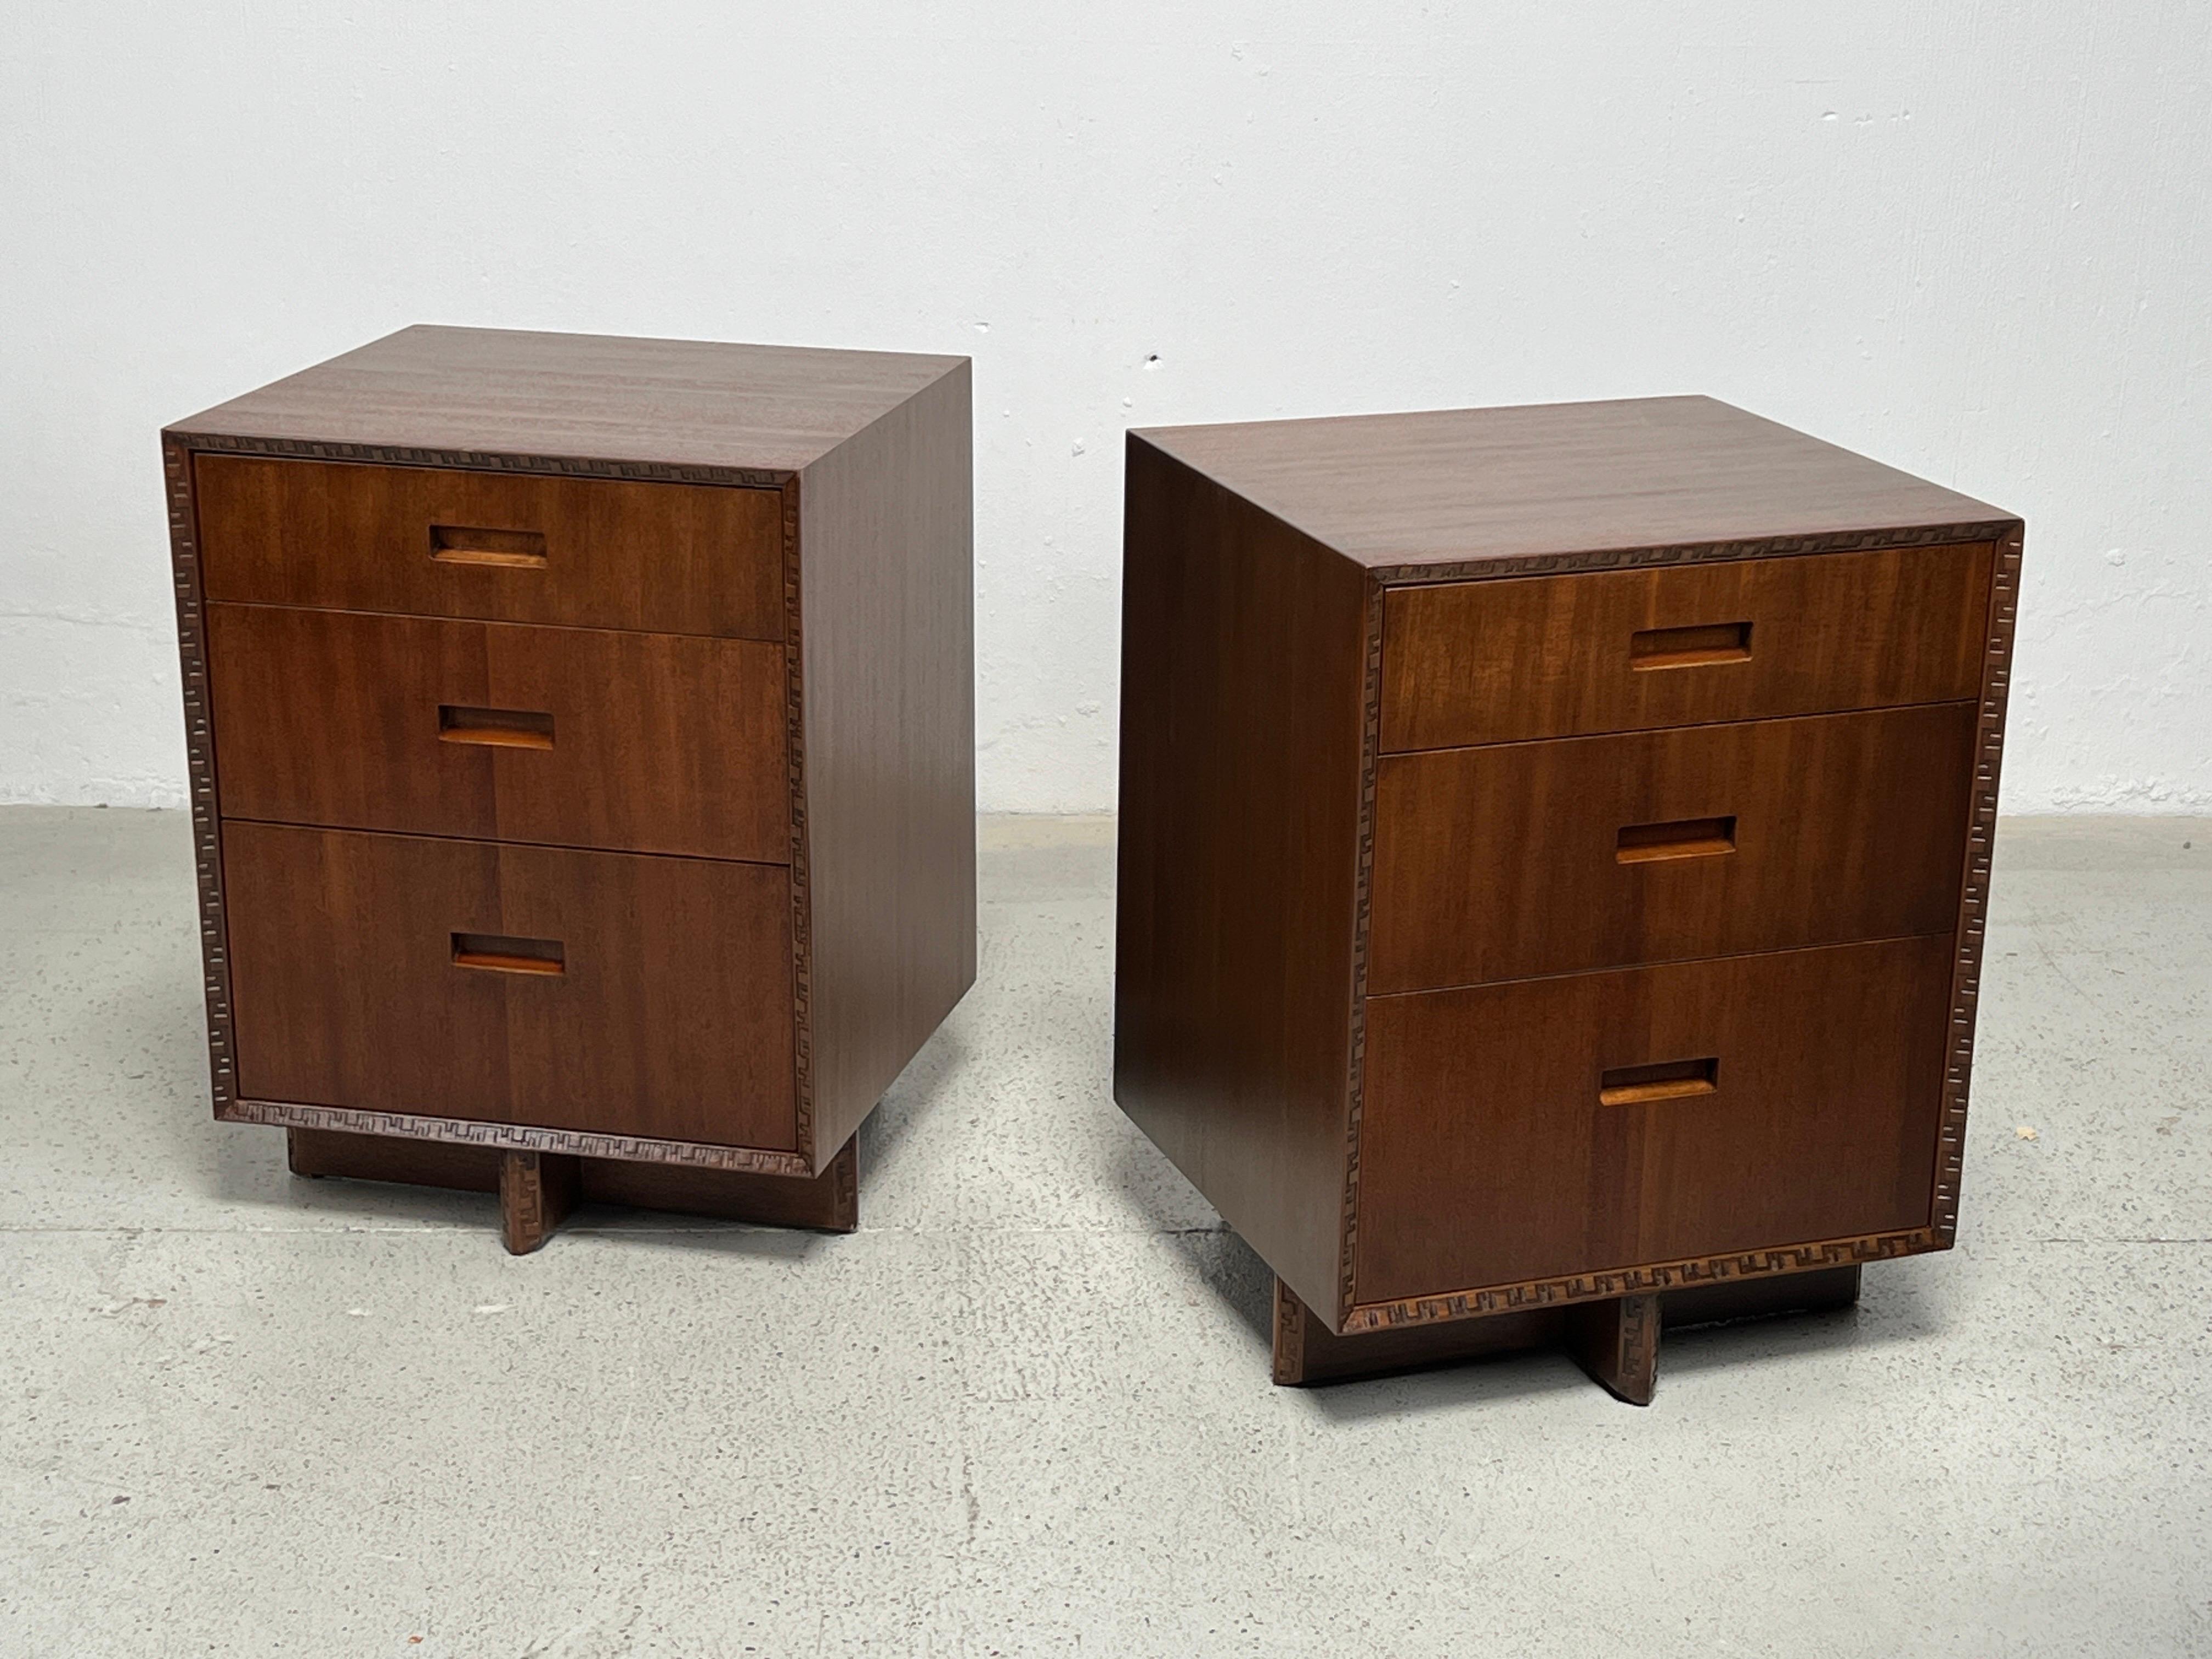 Pair of Nightstands / Small Cabinets by Frank Lloyd Wright for Henredon  In Good Condition For Sale In Dallas, TX